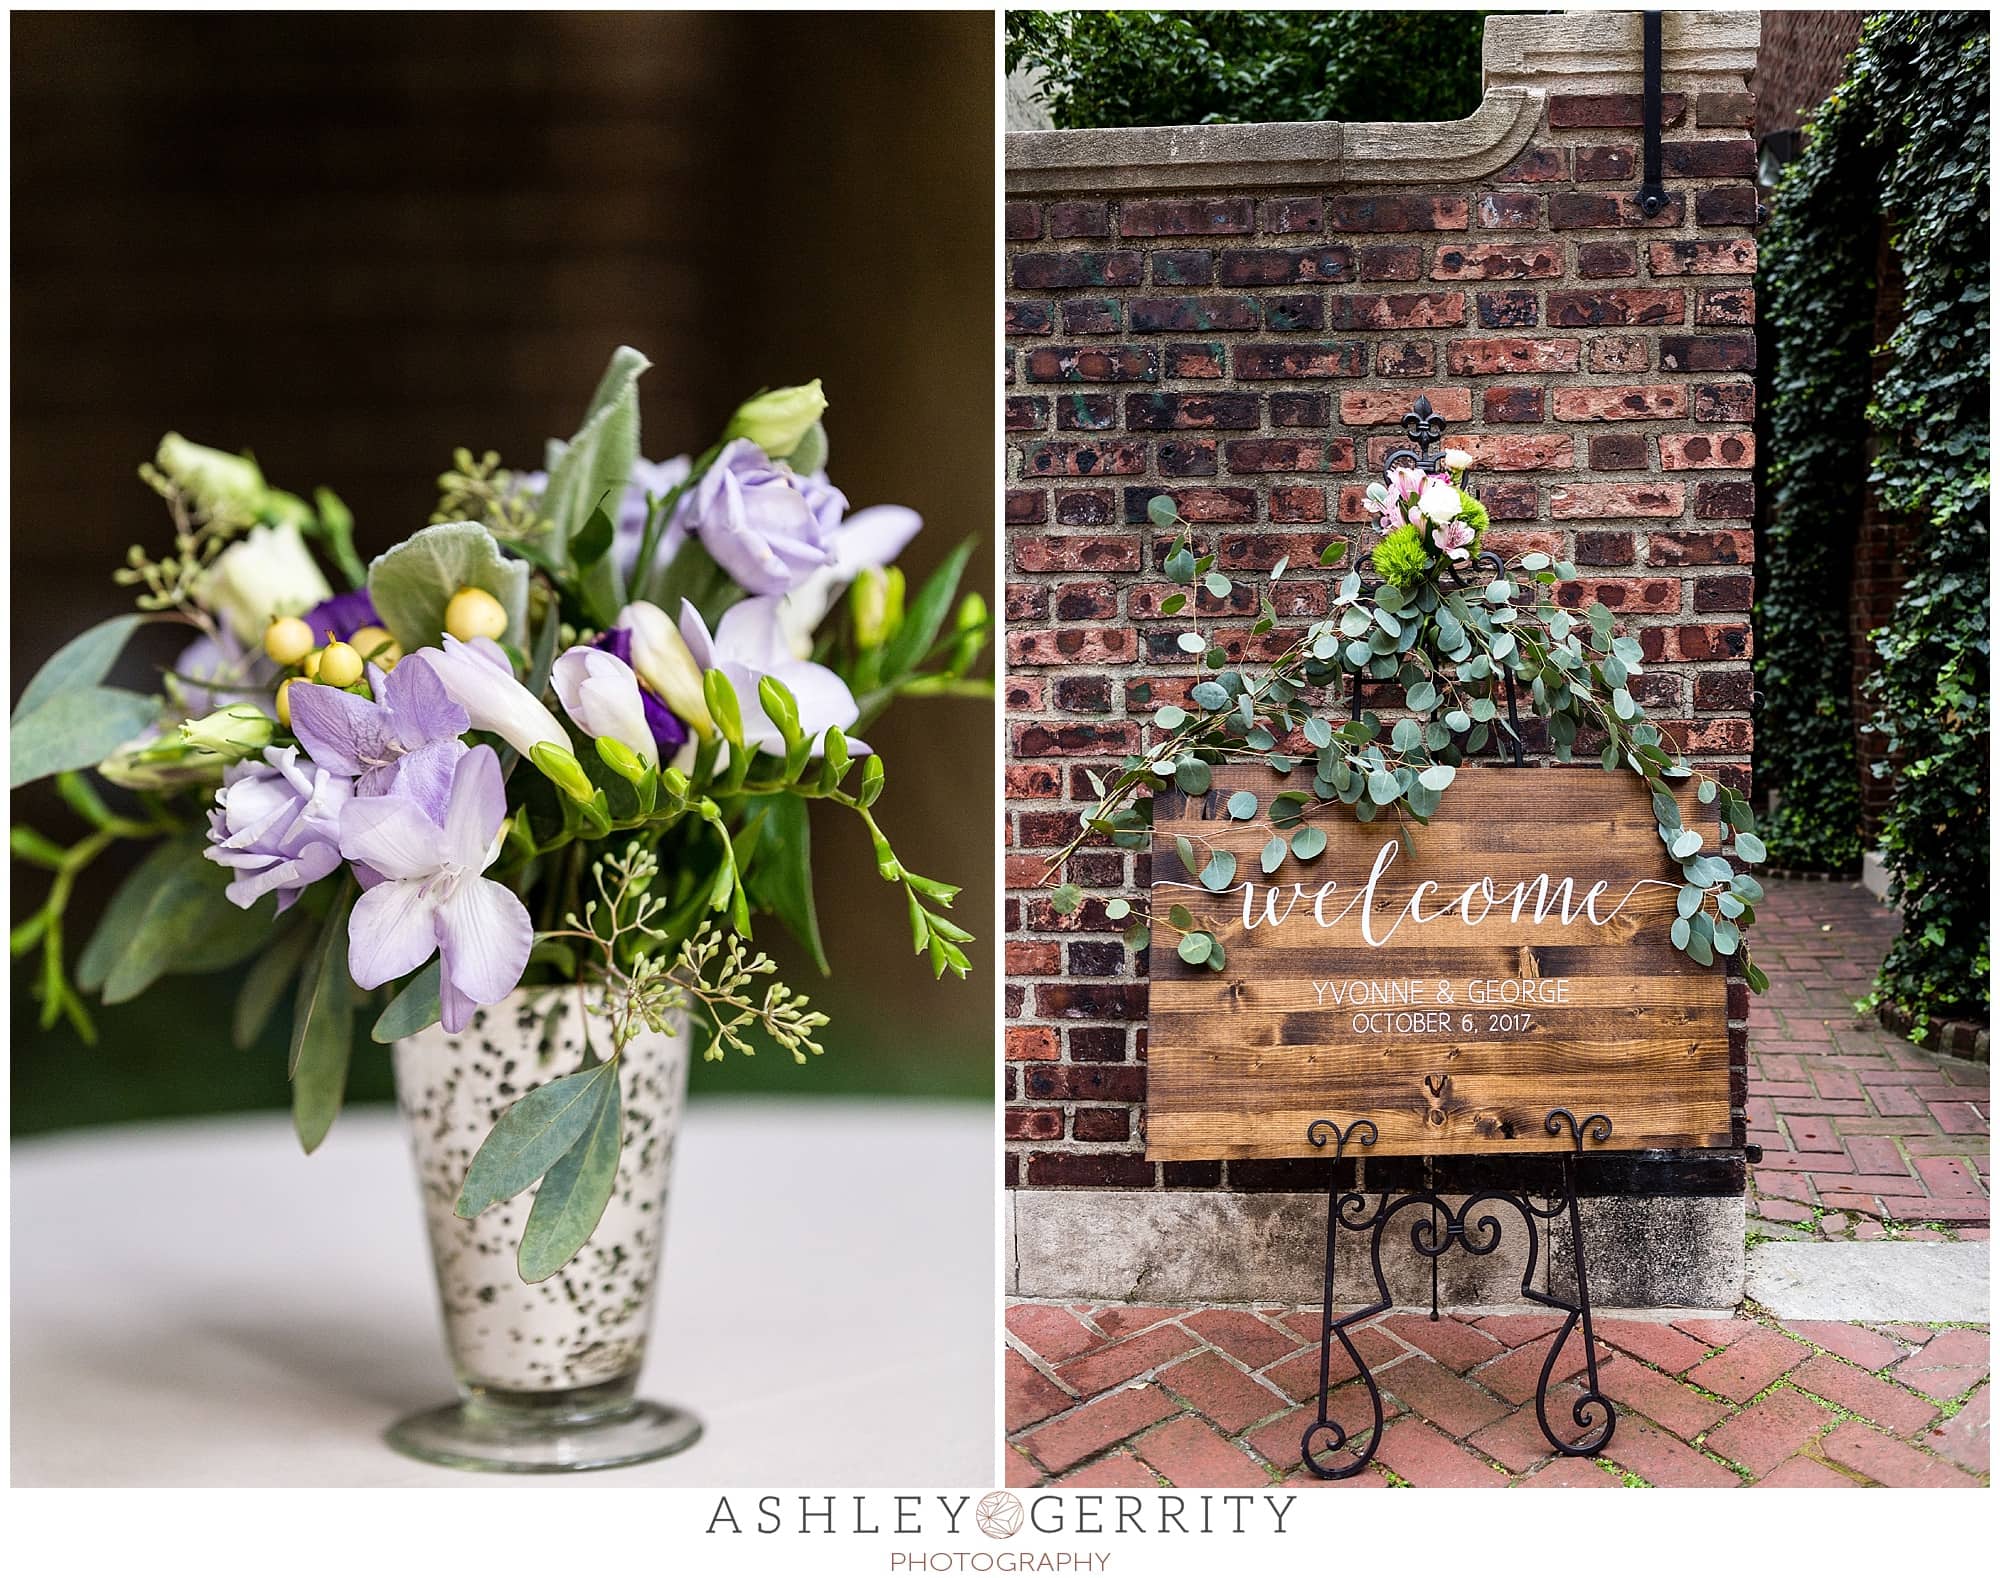 Greenery & lilac flowers brought together different wedding details such as these mercury glass vases and the wooden hand-painted welcome sign.